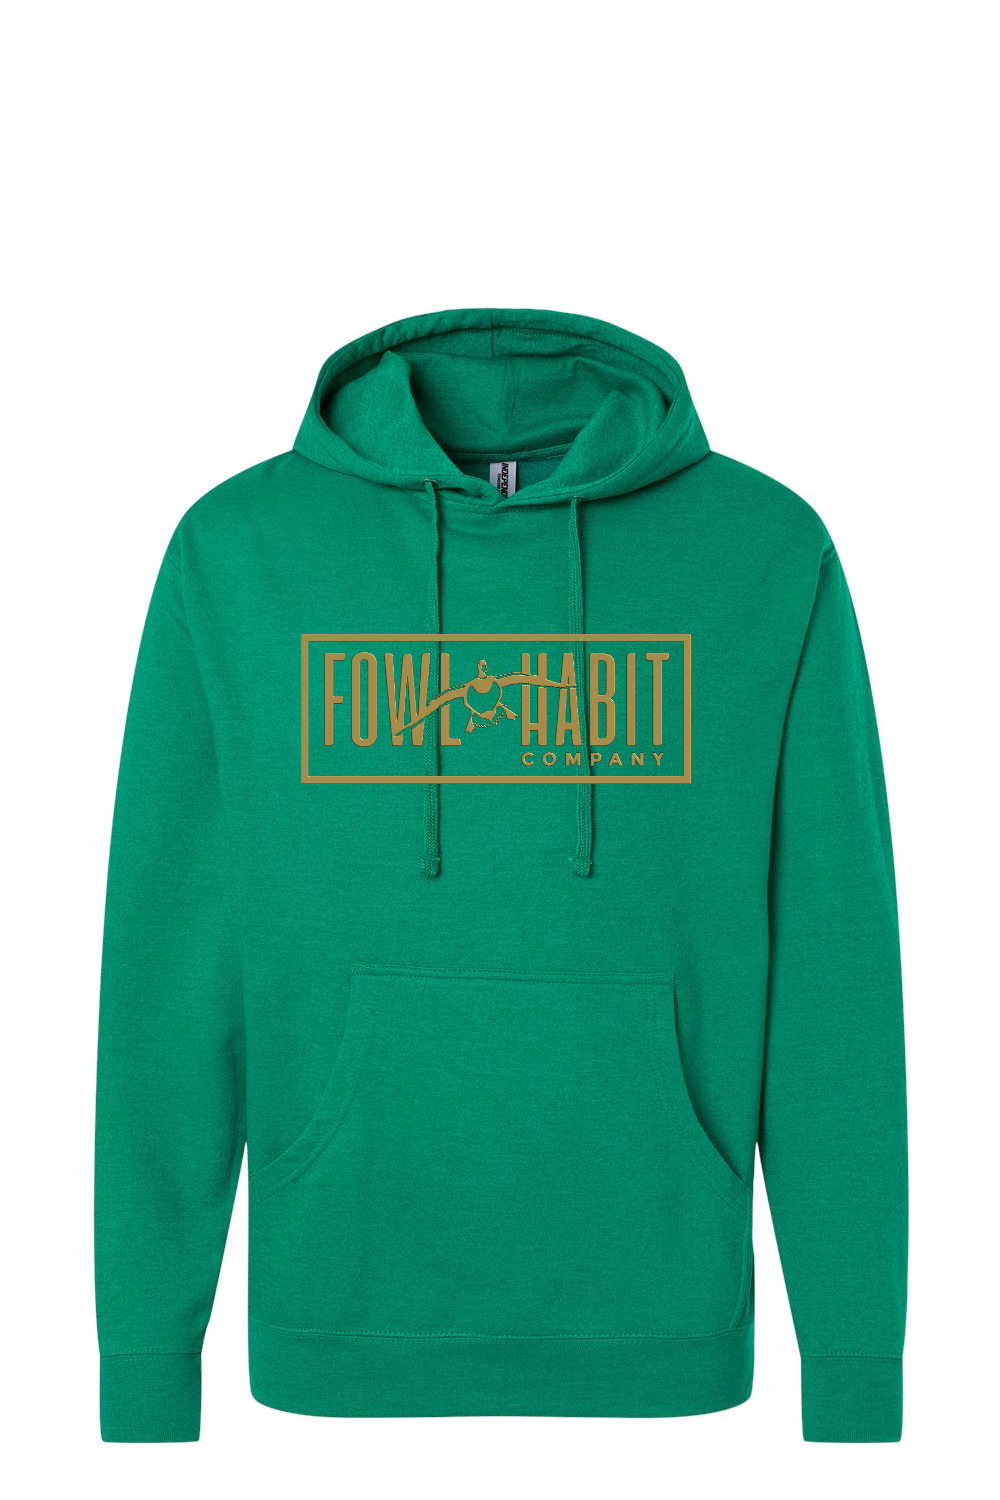 Cupped Up Hoodie - Fowl Habit Co.